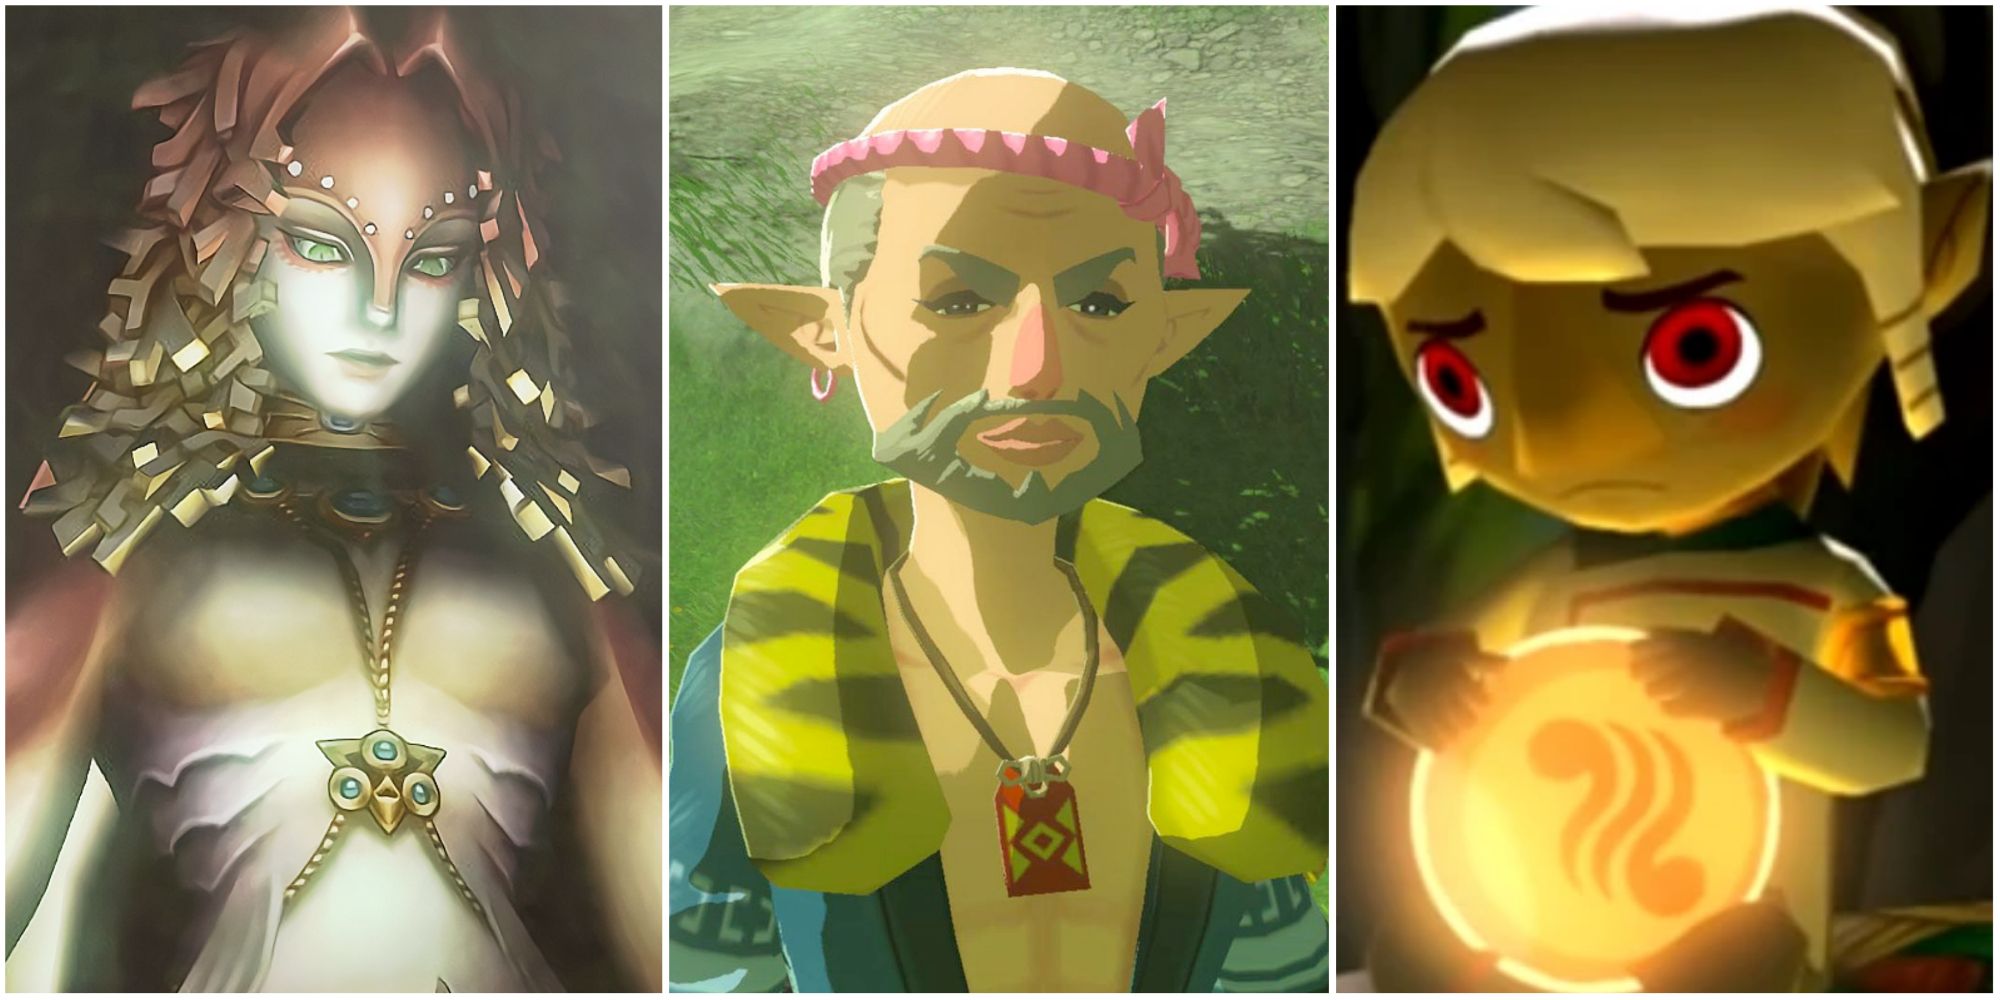 The Legend of Zelda's coolest and decidedly uncool versions of